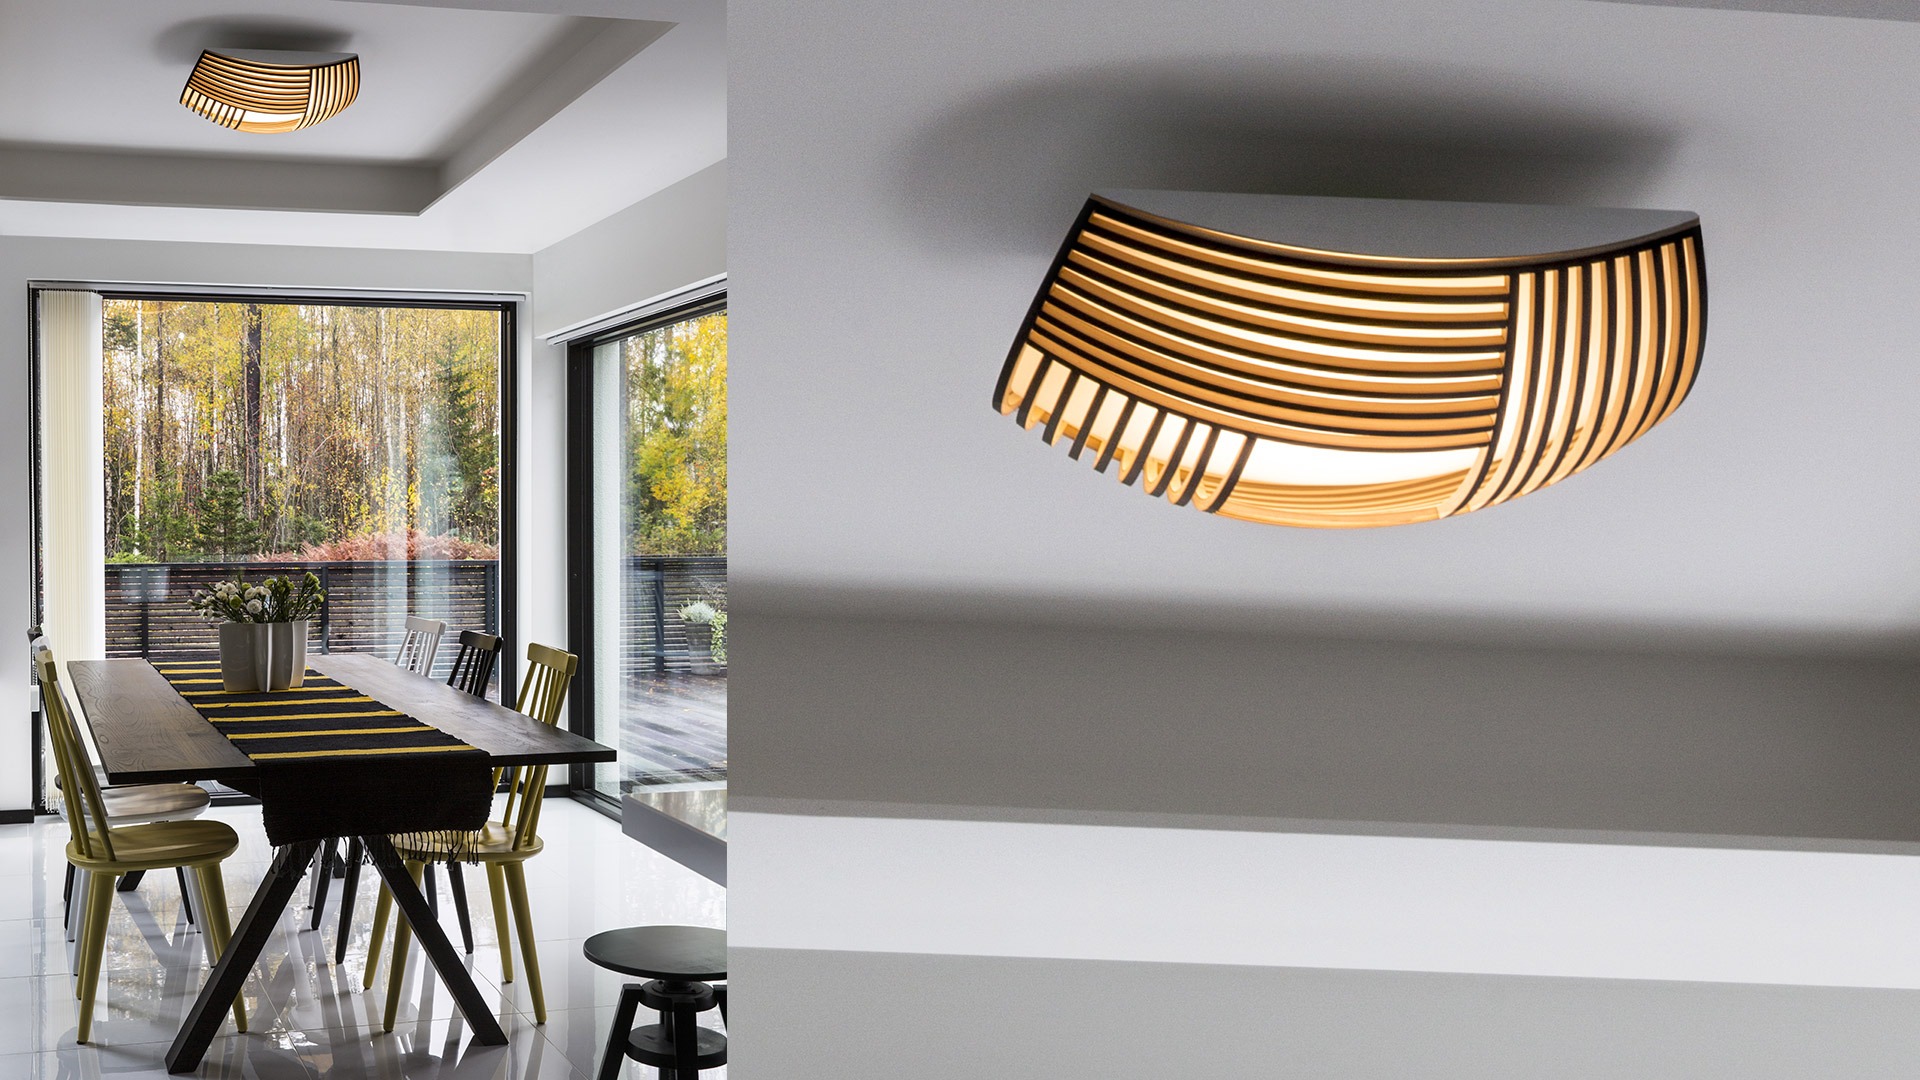 Wooden Kuulto 9100 ceiling  lamp  by Secto Design  Secto Design 